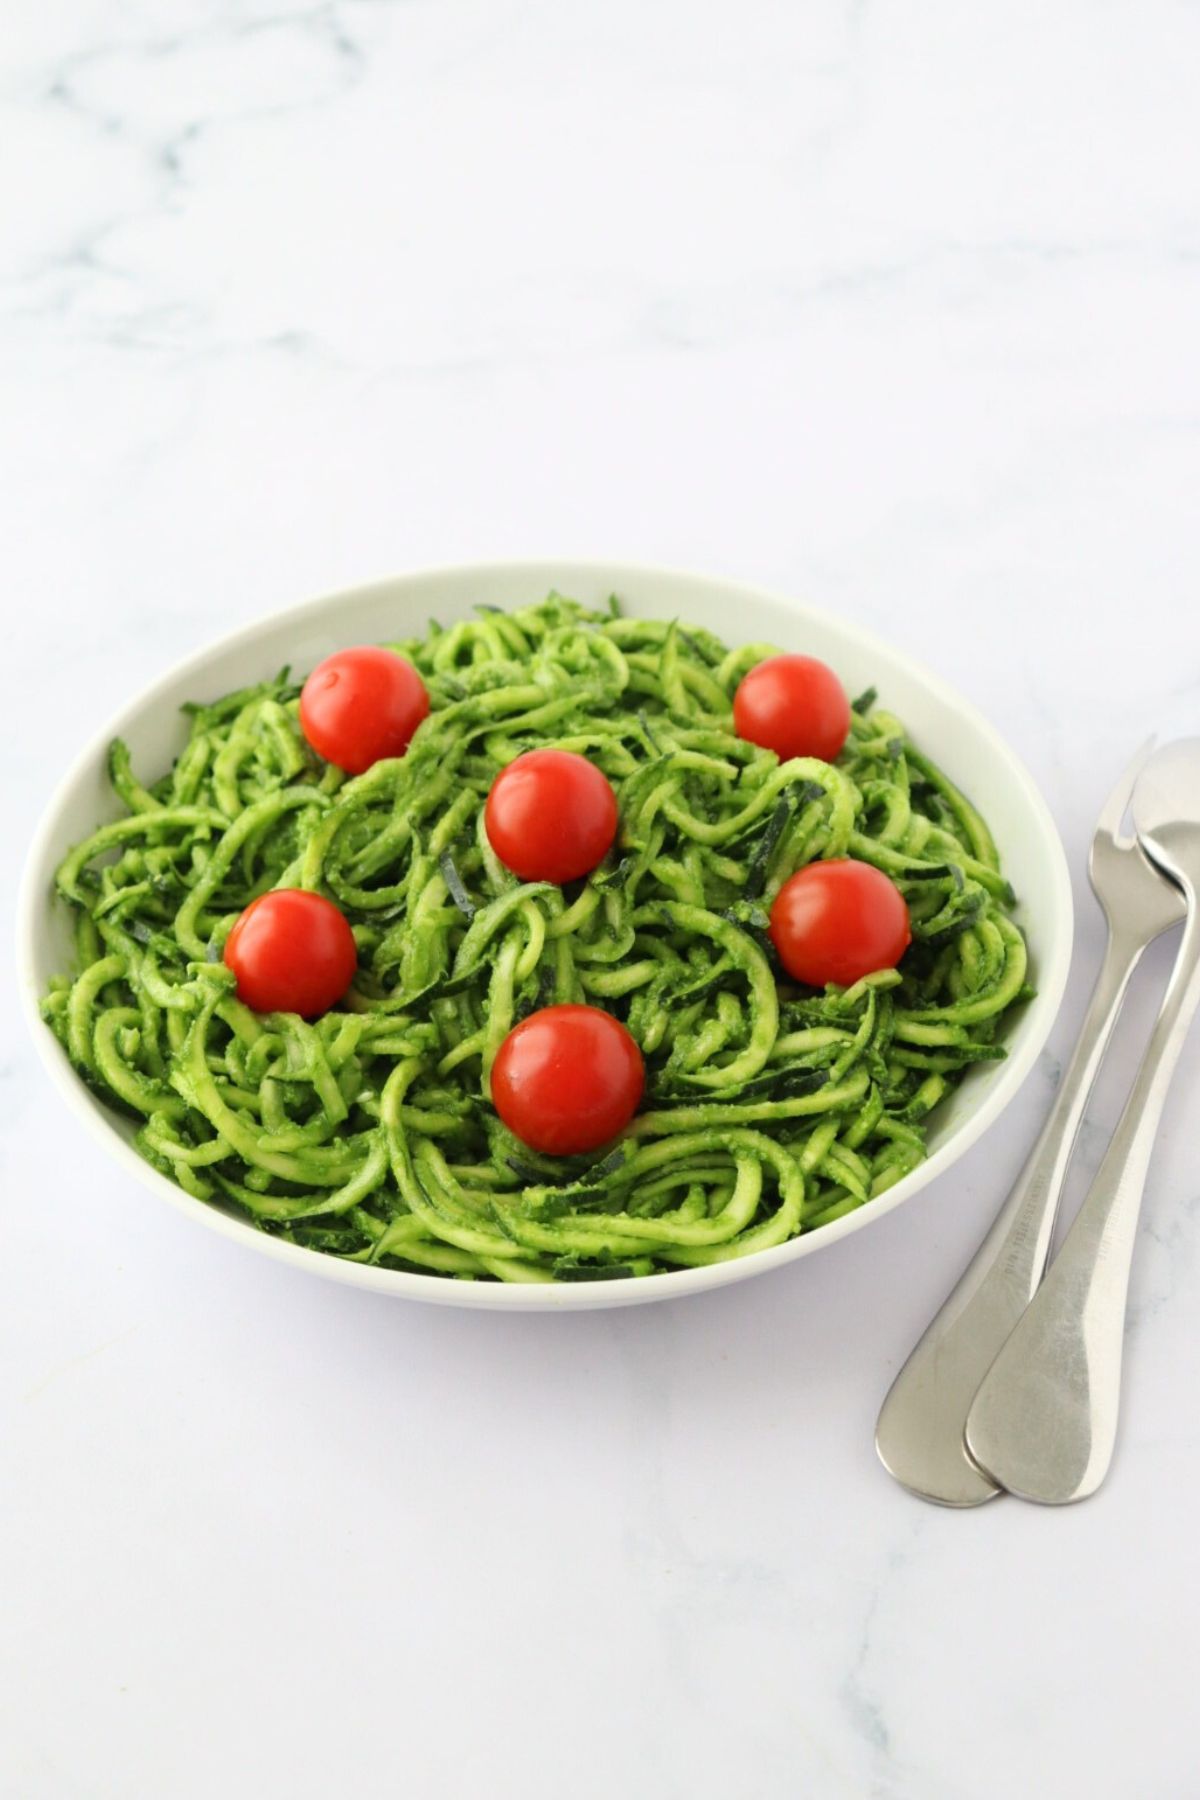 A plate full of zucchini noodles coated with pesto and some cherry tomatoes on top, a spoon and a fork on the side.